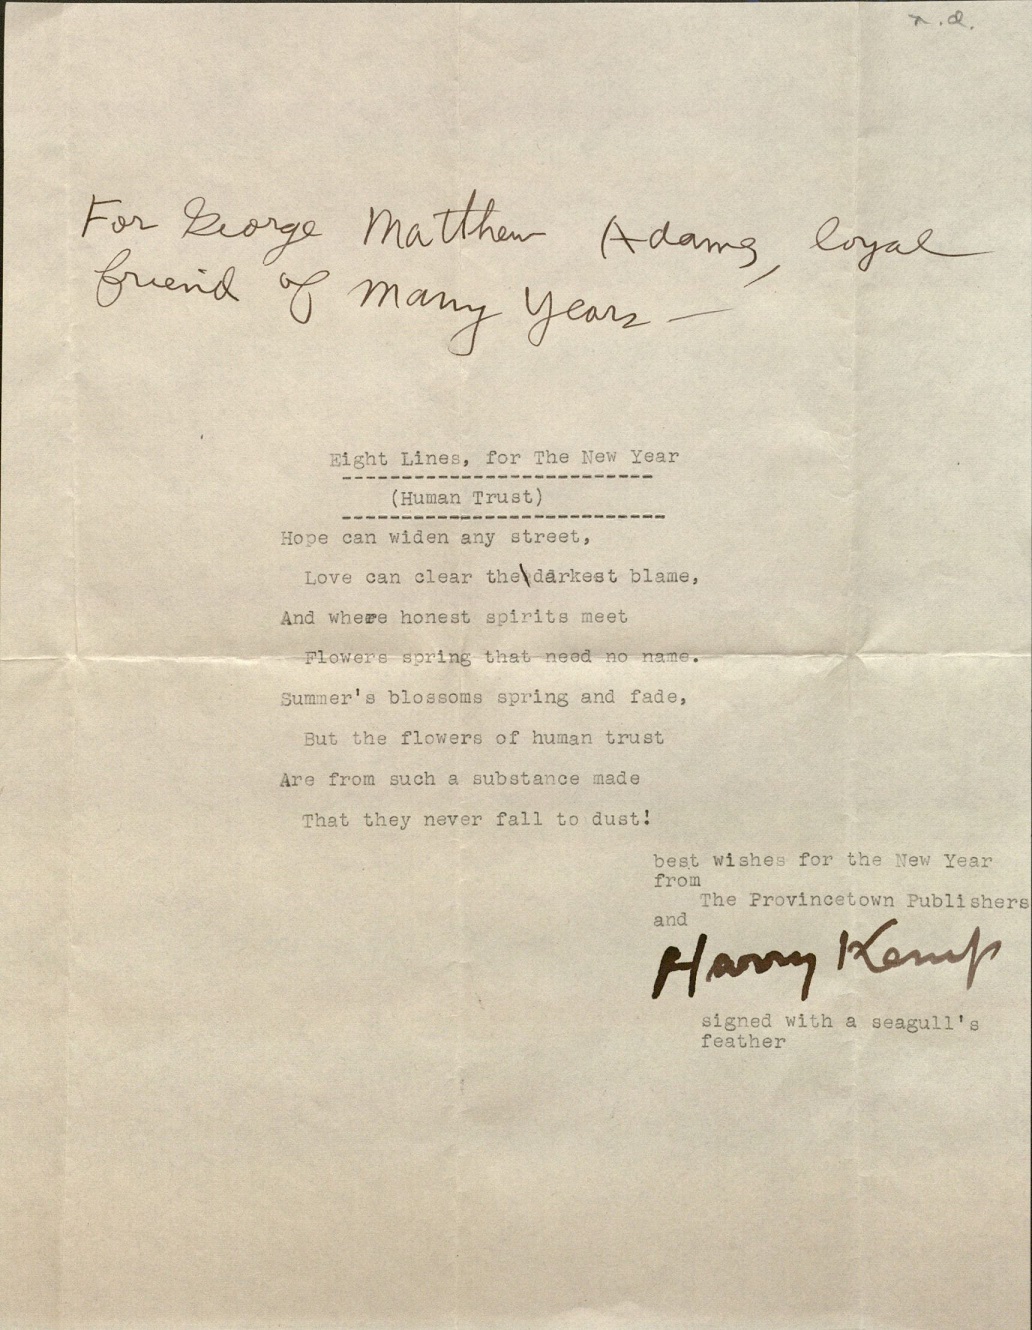 Typescript poem ("Eight Lines, for the New Year") by Harry Kemp, with manuscript inscription.